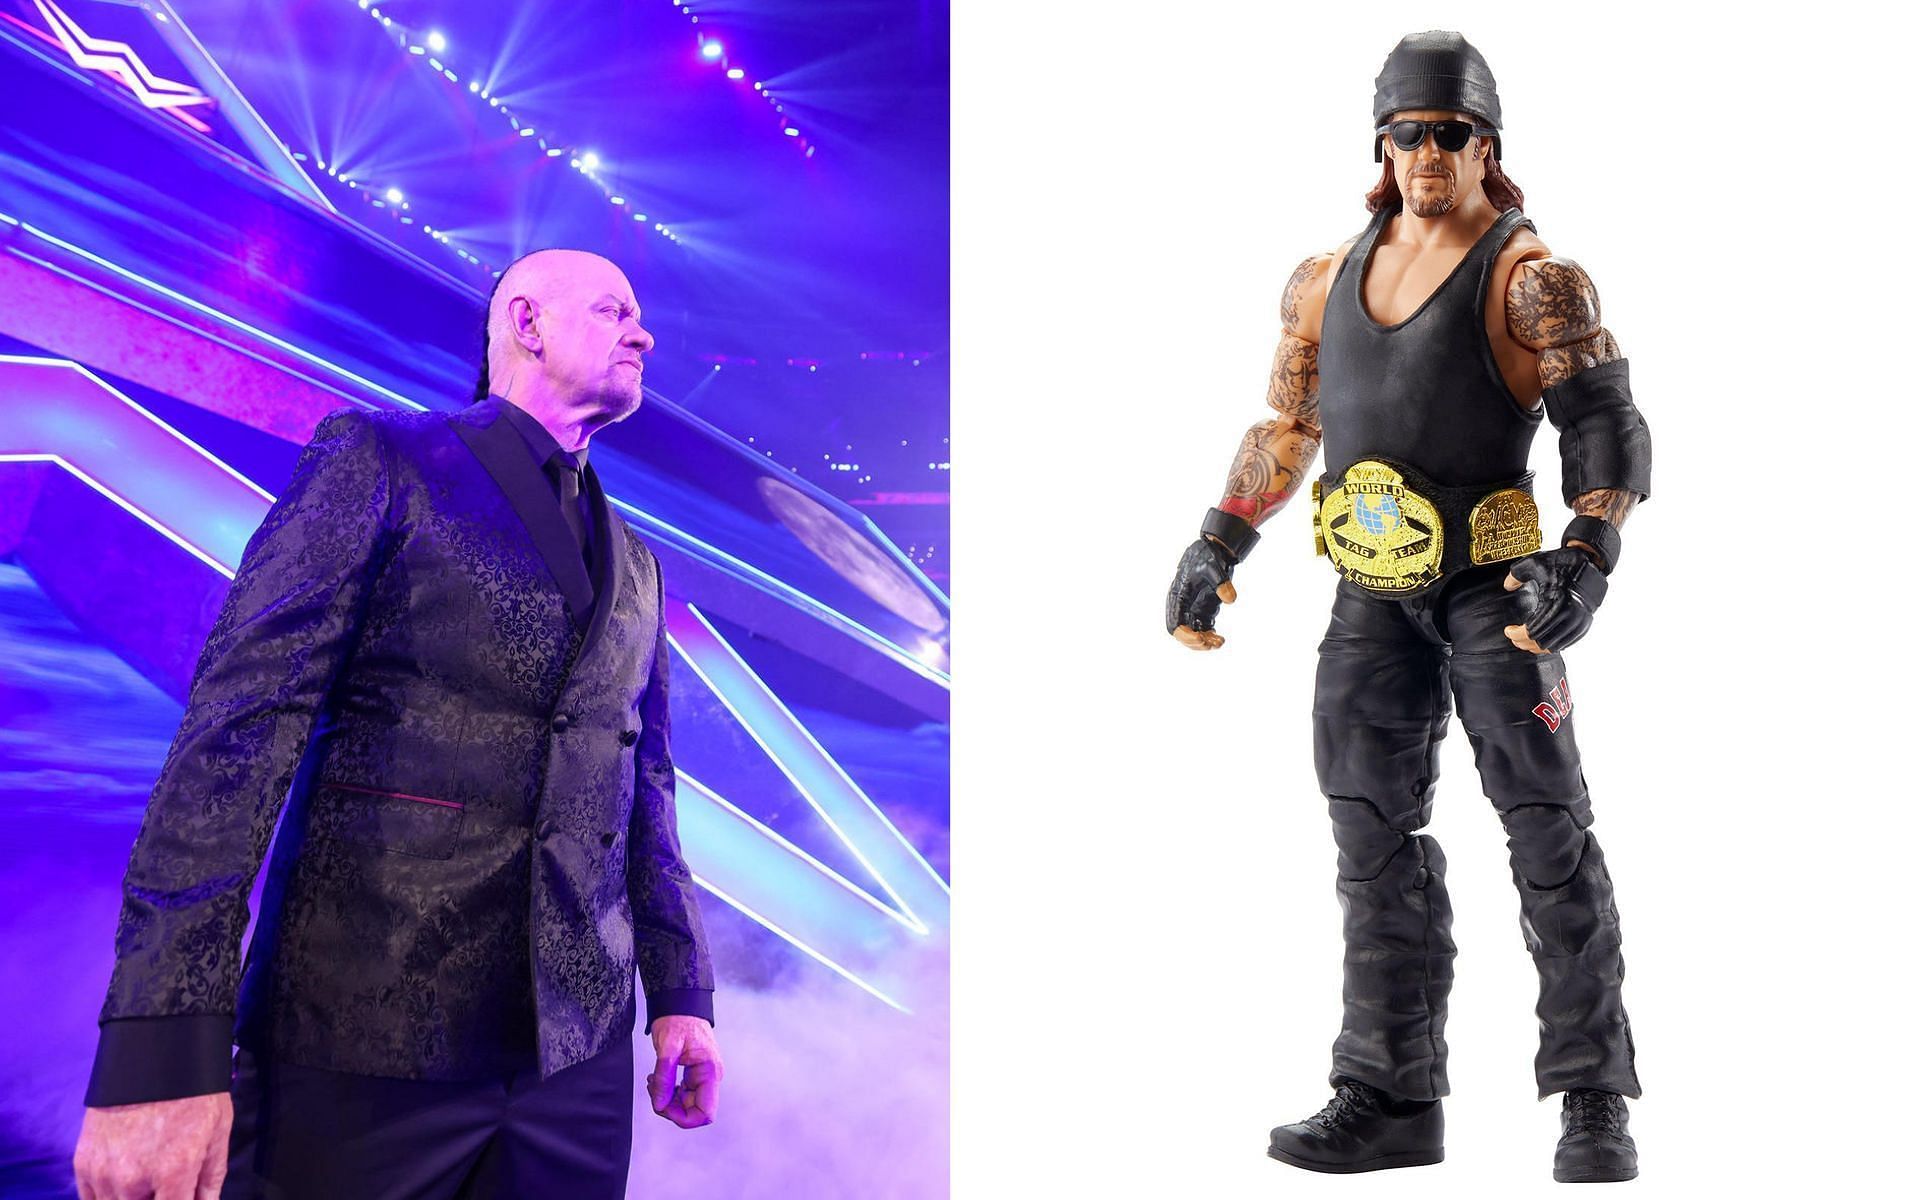 The Undertaker entered the 2022 Hall of Fame!